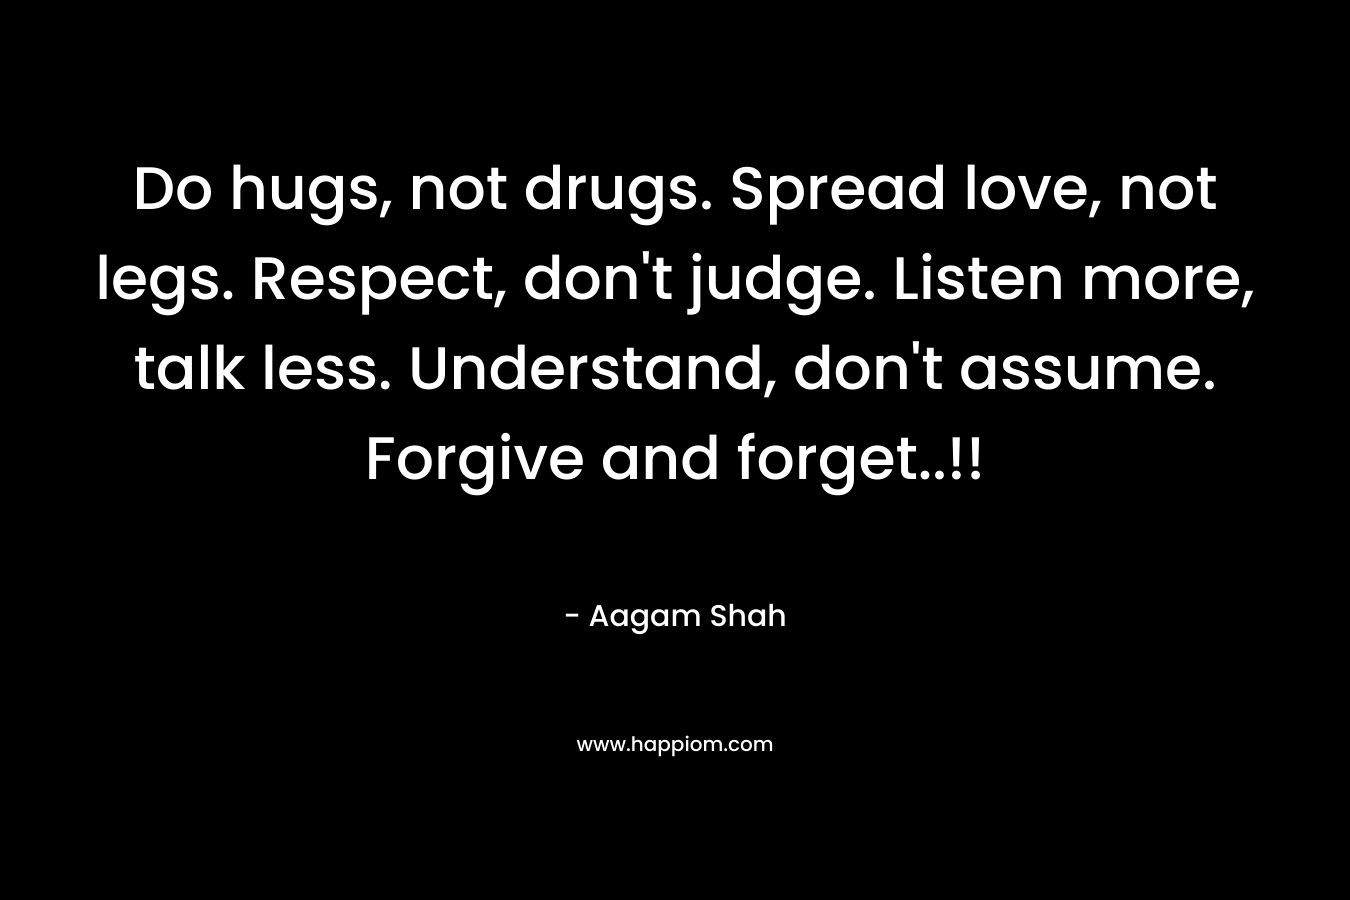 Do hugs, not drugs. Spread love, not legs. Respect, don't judge. Listen more, talk less. Understand, don't assume. Forgive and forget..!!